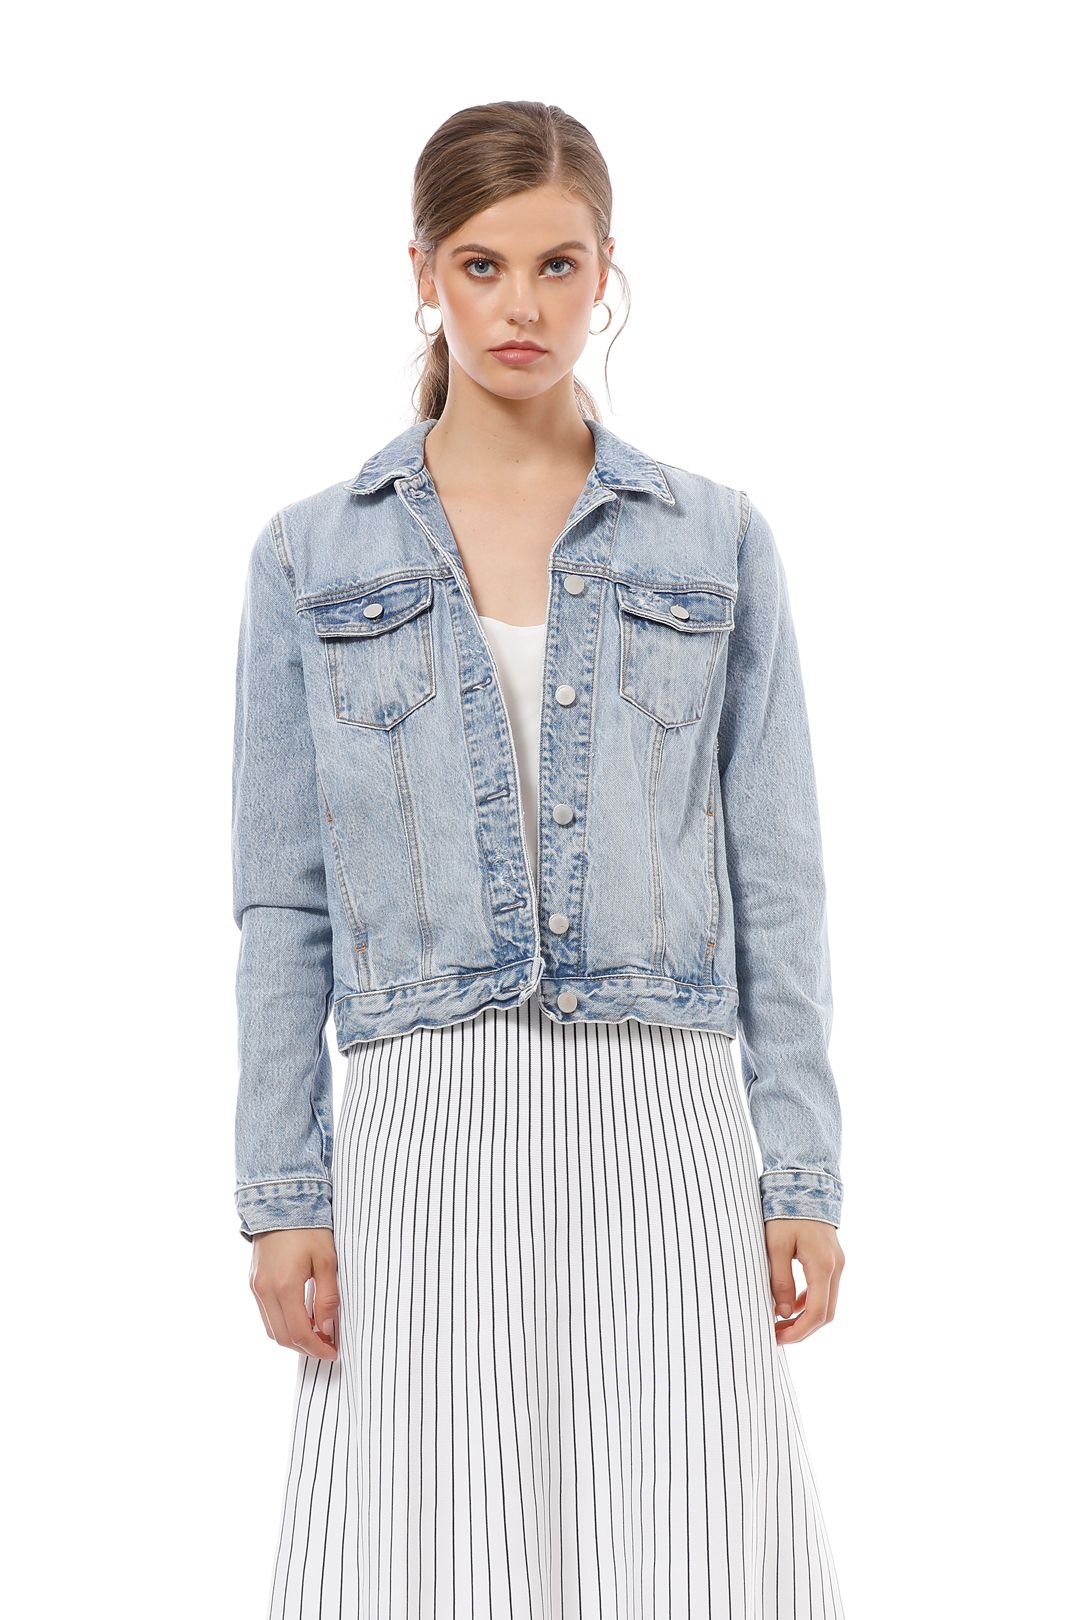 Original Jean Jacket in Blue by Nobody for Hire